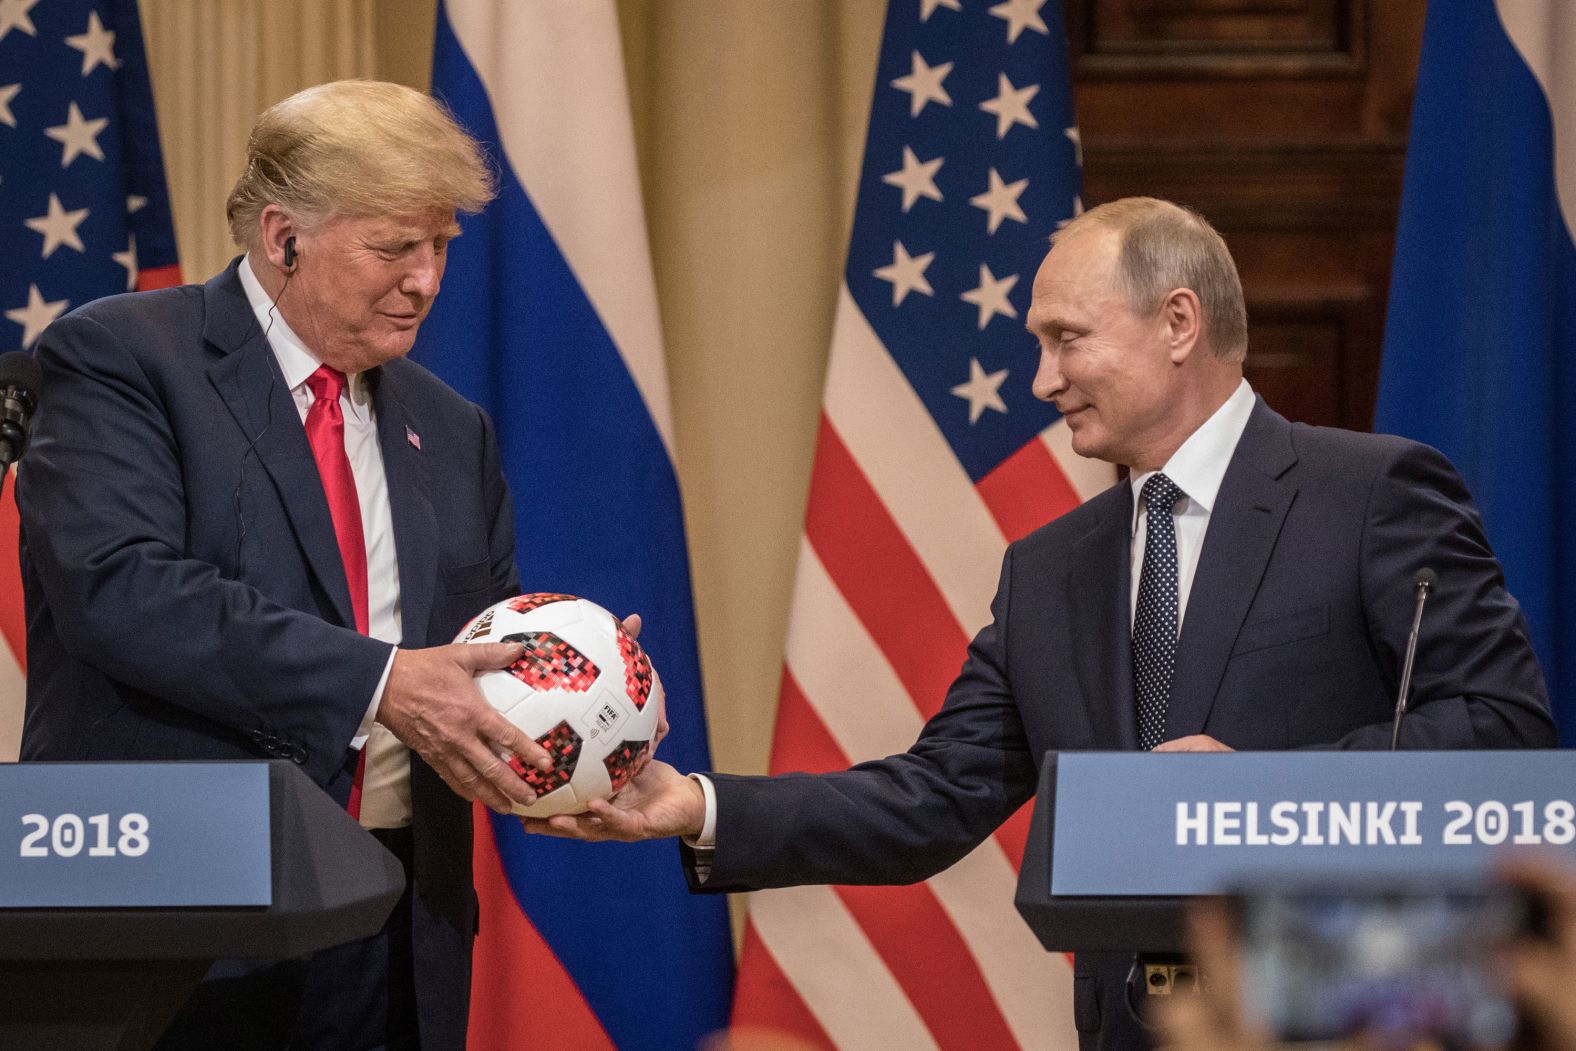 Putin hands US President Donald Trump a World Cup football during a joint press conference after their 2018 summit in Helsinki, Finland. The two leaders met one-on-one and discussed a range of issues, including the 2016 US election.